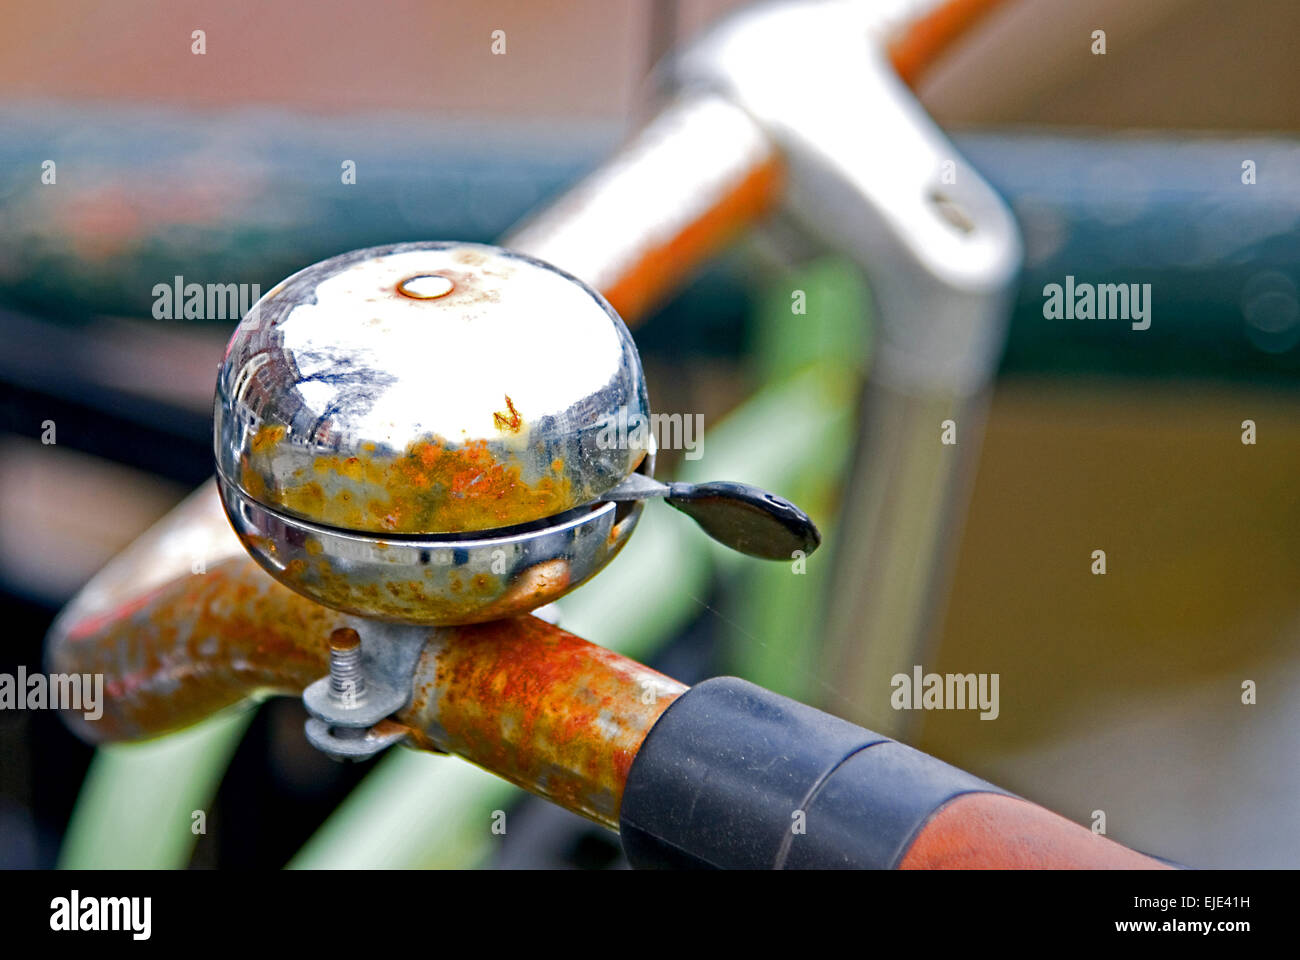 Abstract image of an old bell on a bicycle in Amsterdam, Netherlands Stock Photo